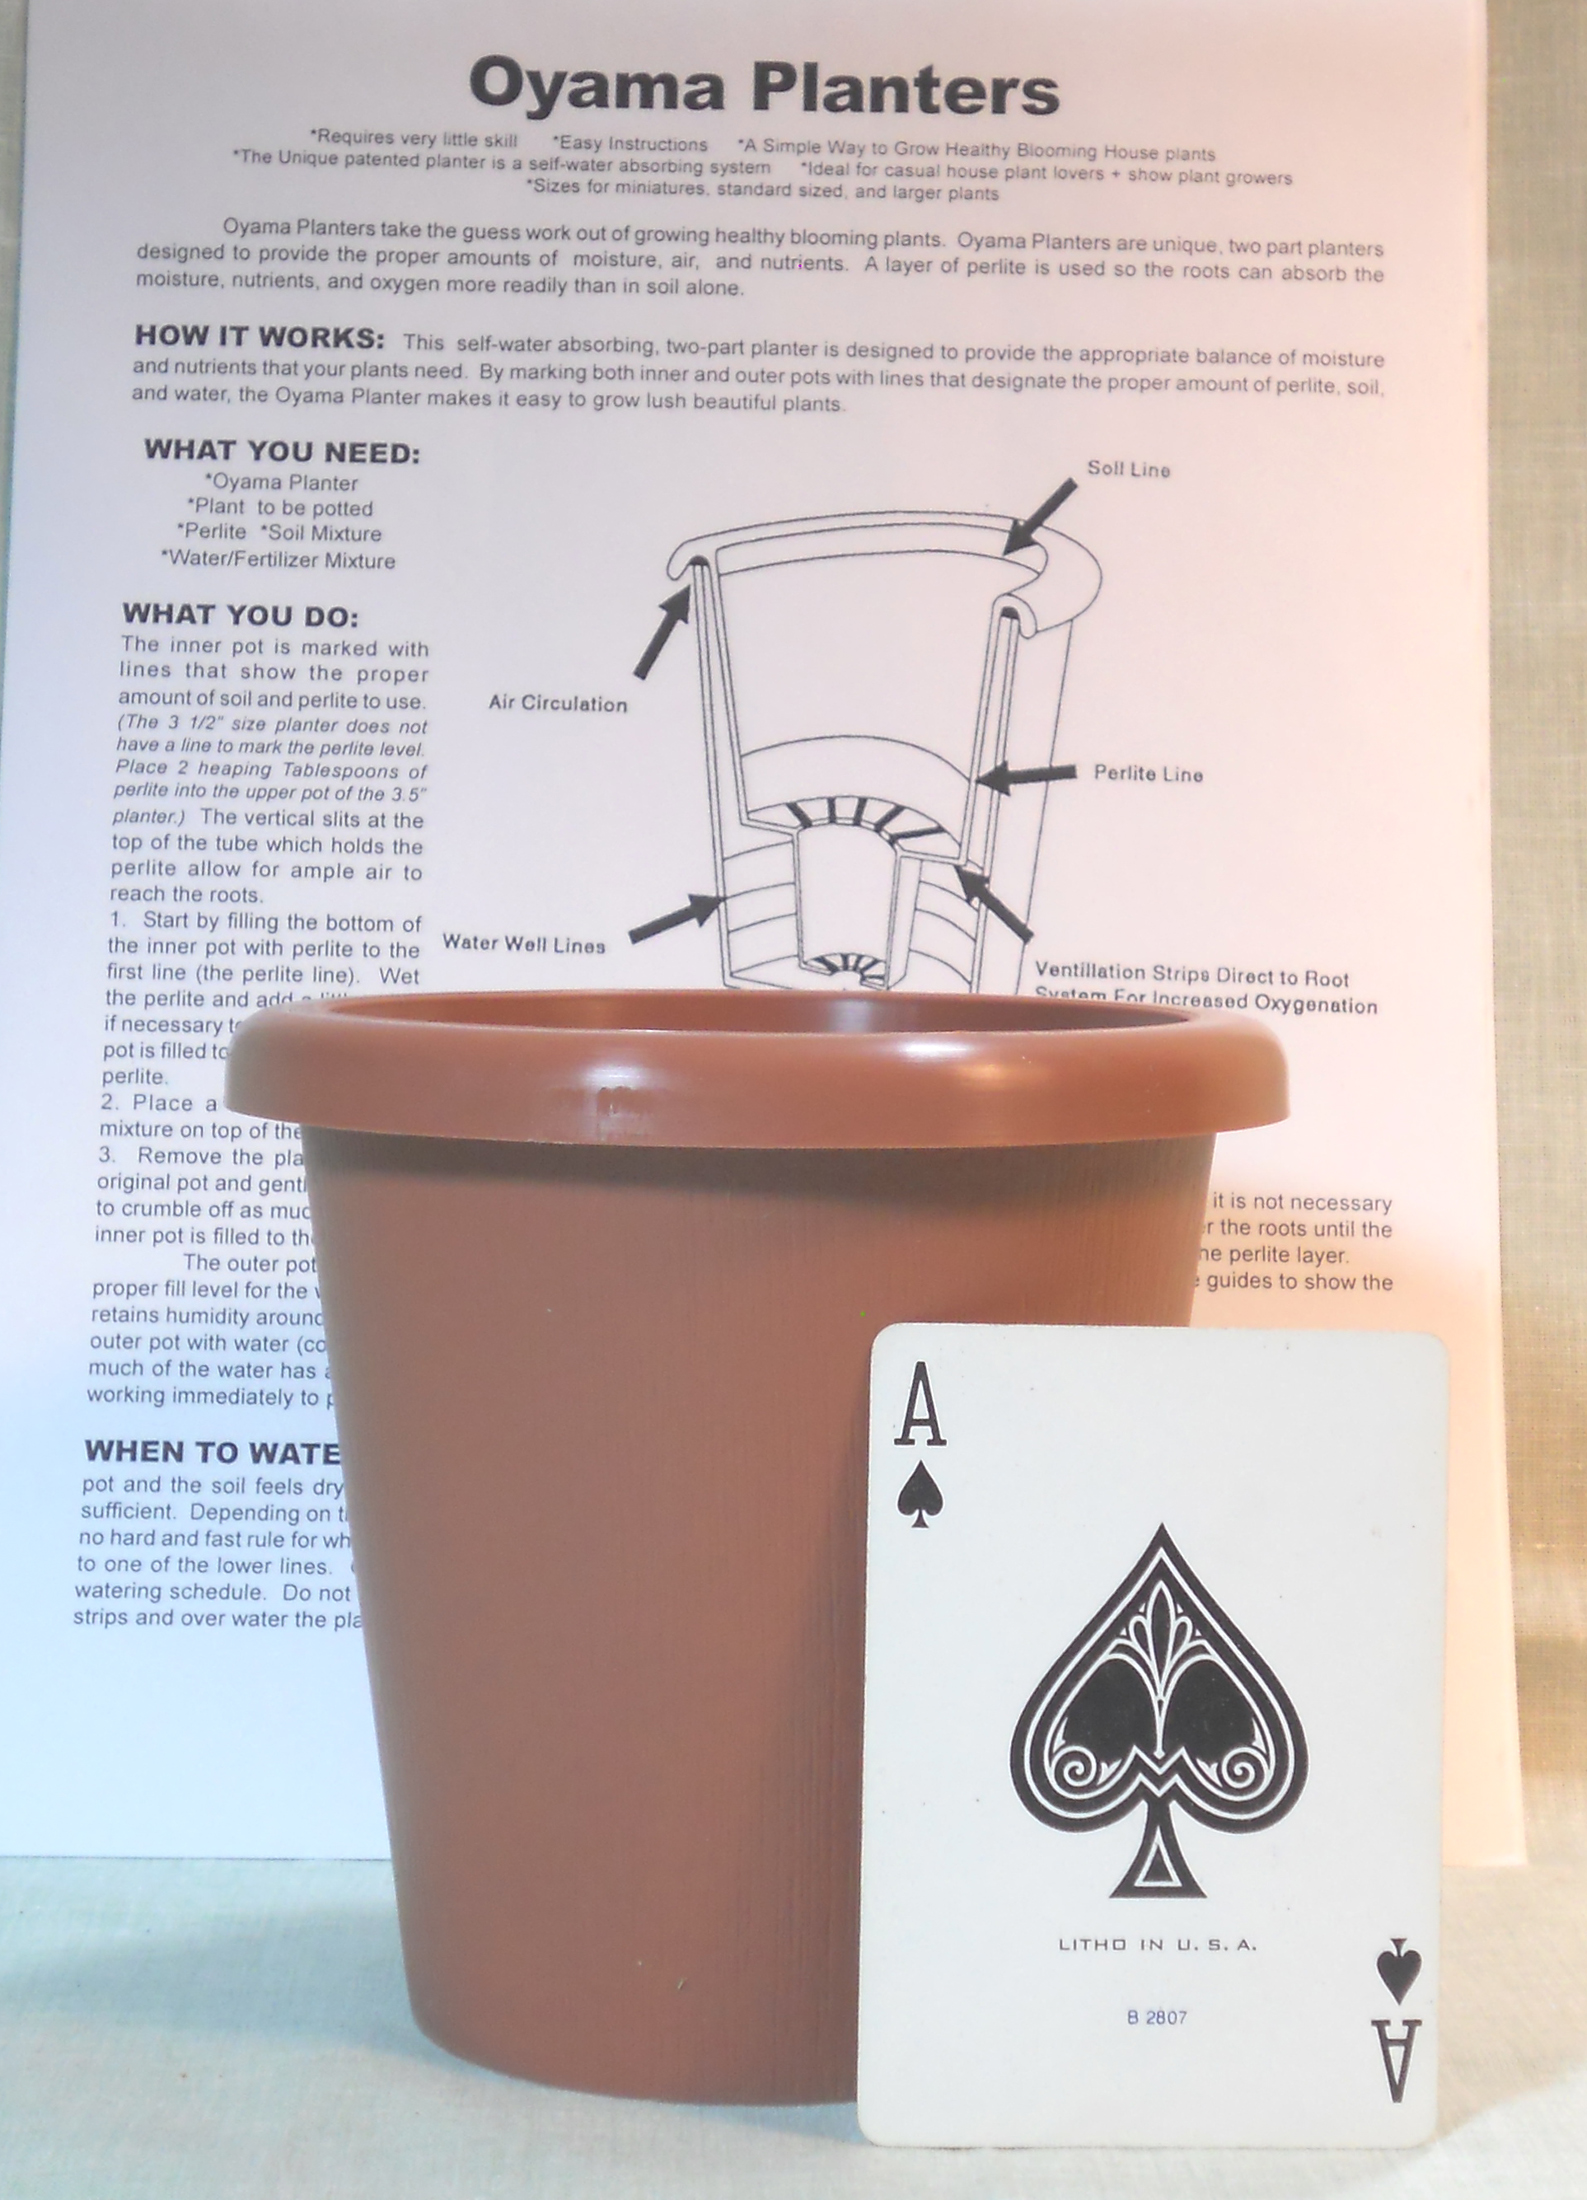 4" Oyama planter with playing card